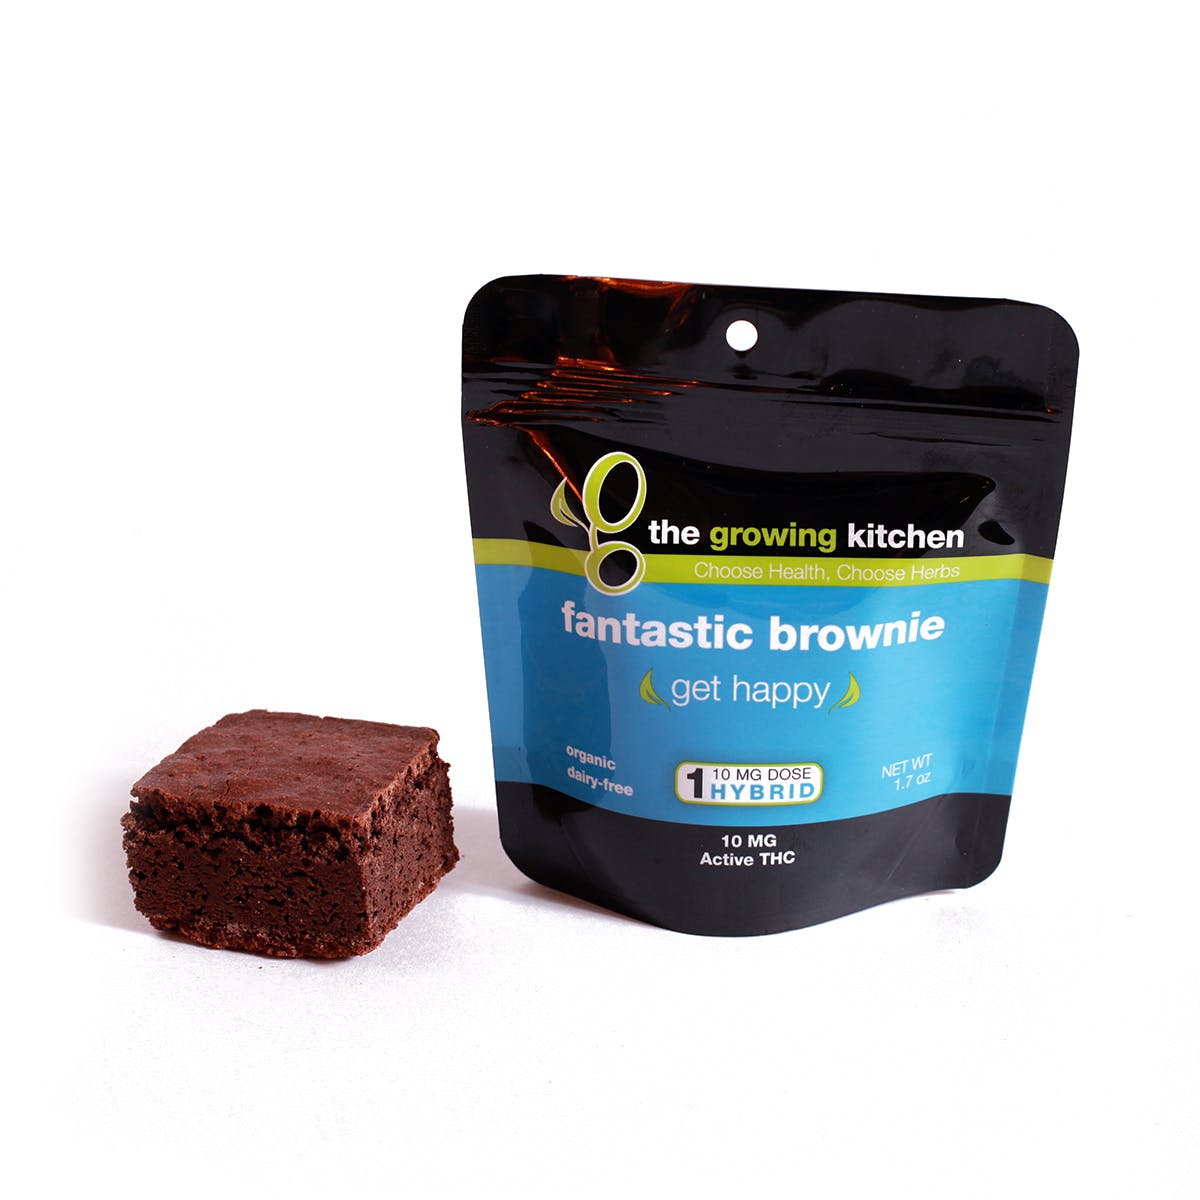 edible-the-growing-kitchen-fantastic-brownie-rec-10mg-11-hybrid